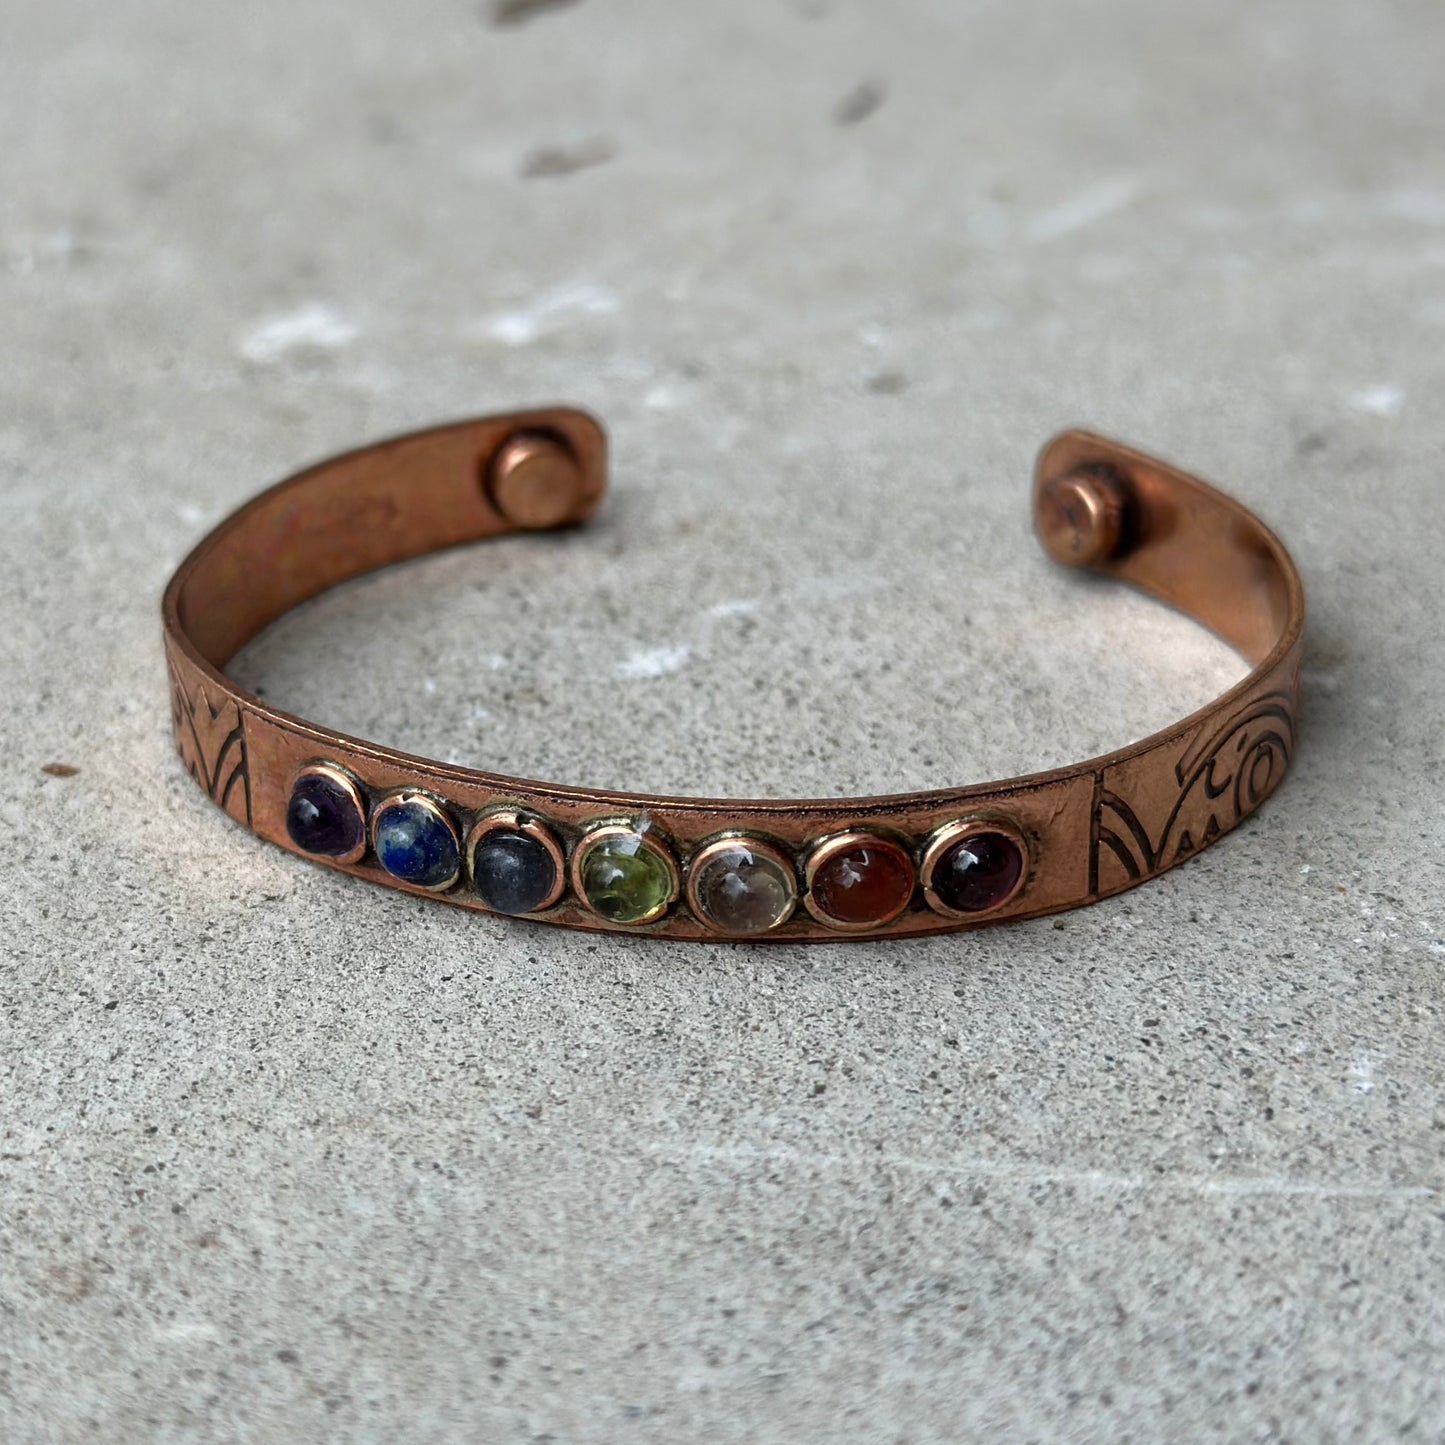 Copper Bangle with Stones